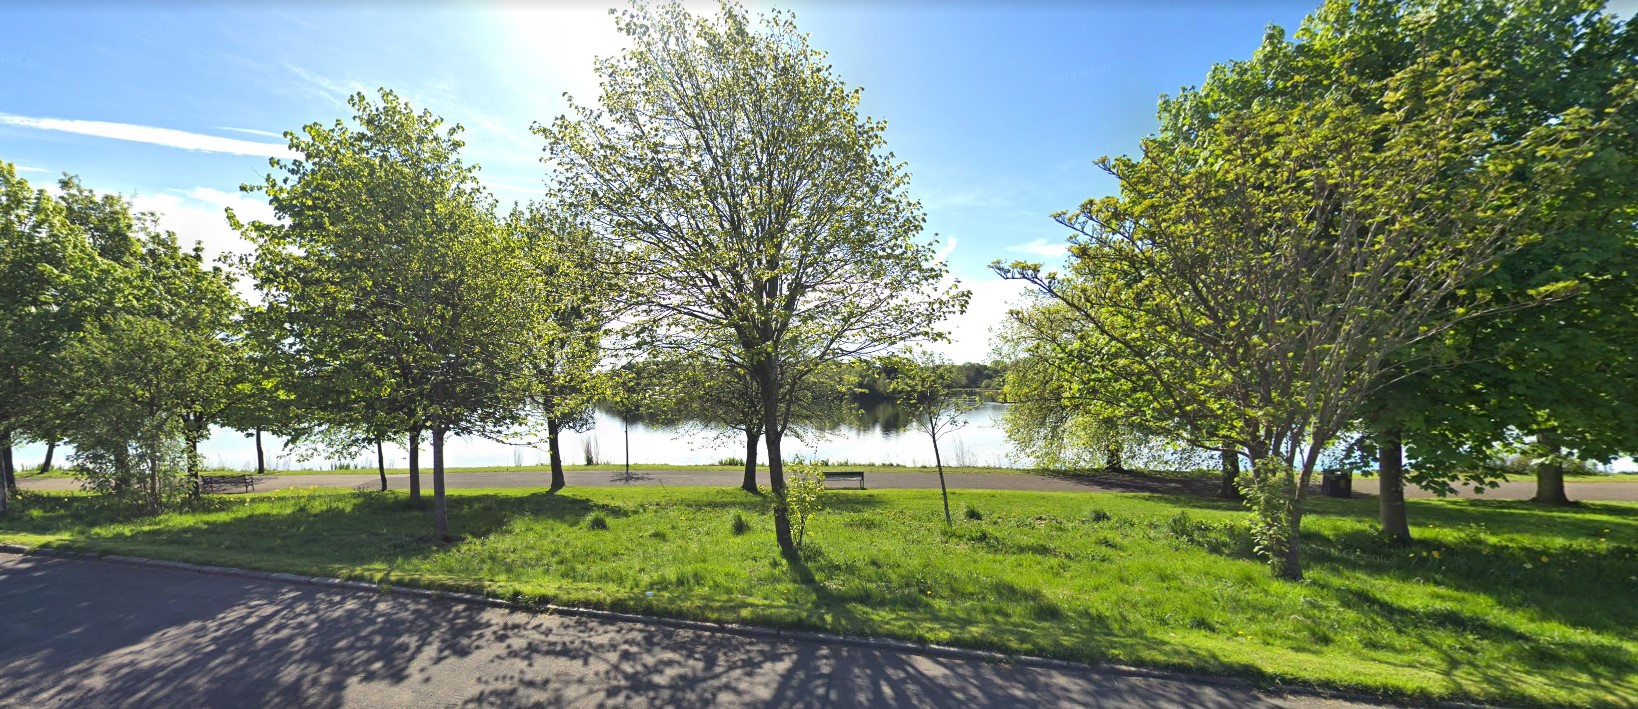 Permission granted for 15 homes near Hogganfield Loch